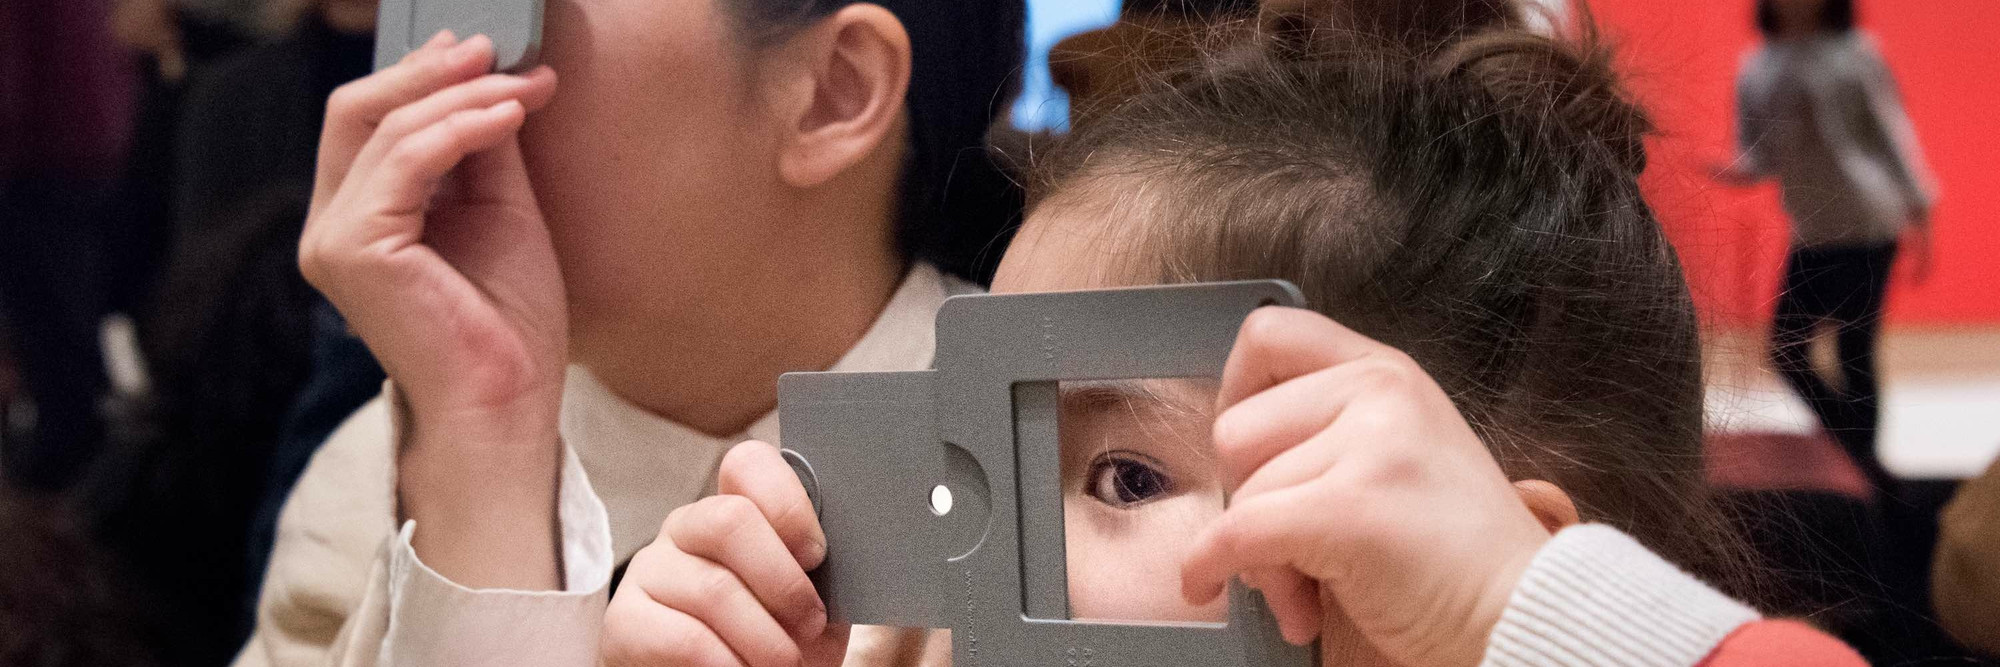 Family Gallery Talks. 2017. Digital Image © The Museum of Modern Art, New York. New York Photo: Martin Seck Image description: A parent and child looking at art through viewfinders during a Family Gallery Talk. Photo: Martin Seck